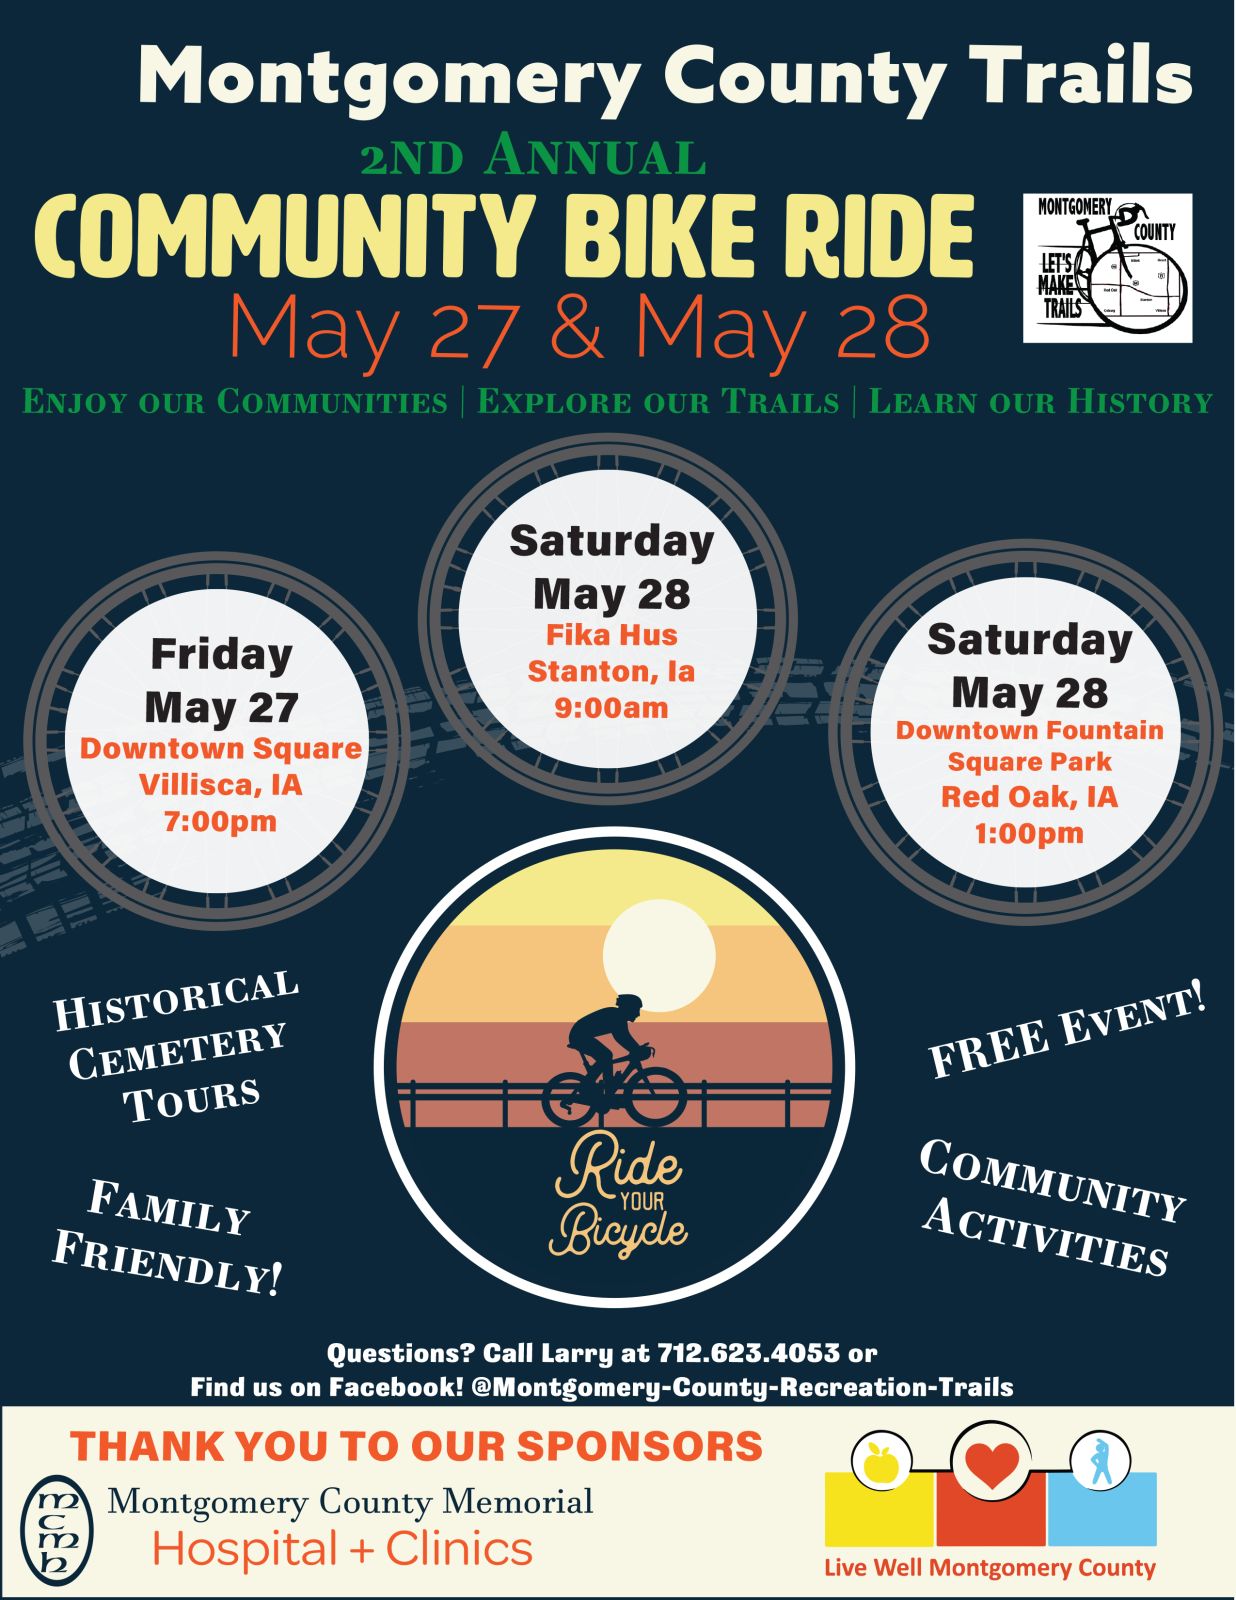 Event Promo Photo For Montgomery County Trails 2nd Annual Community Bike Ride